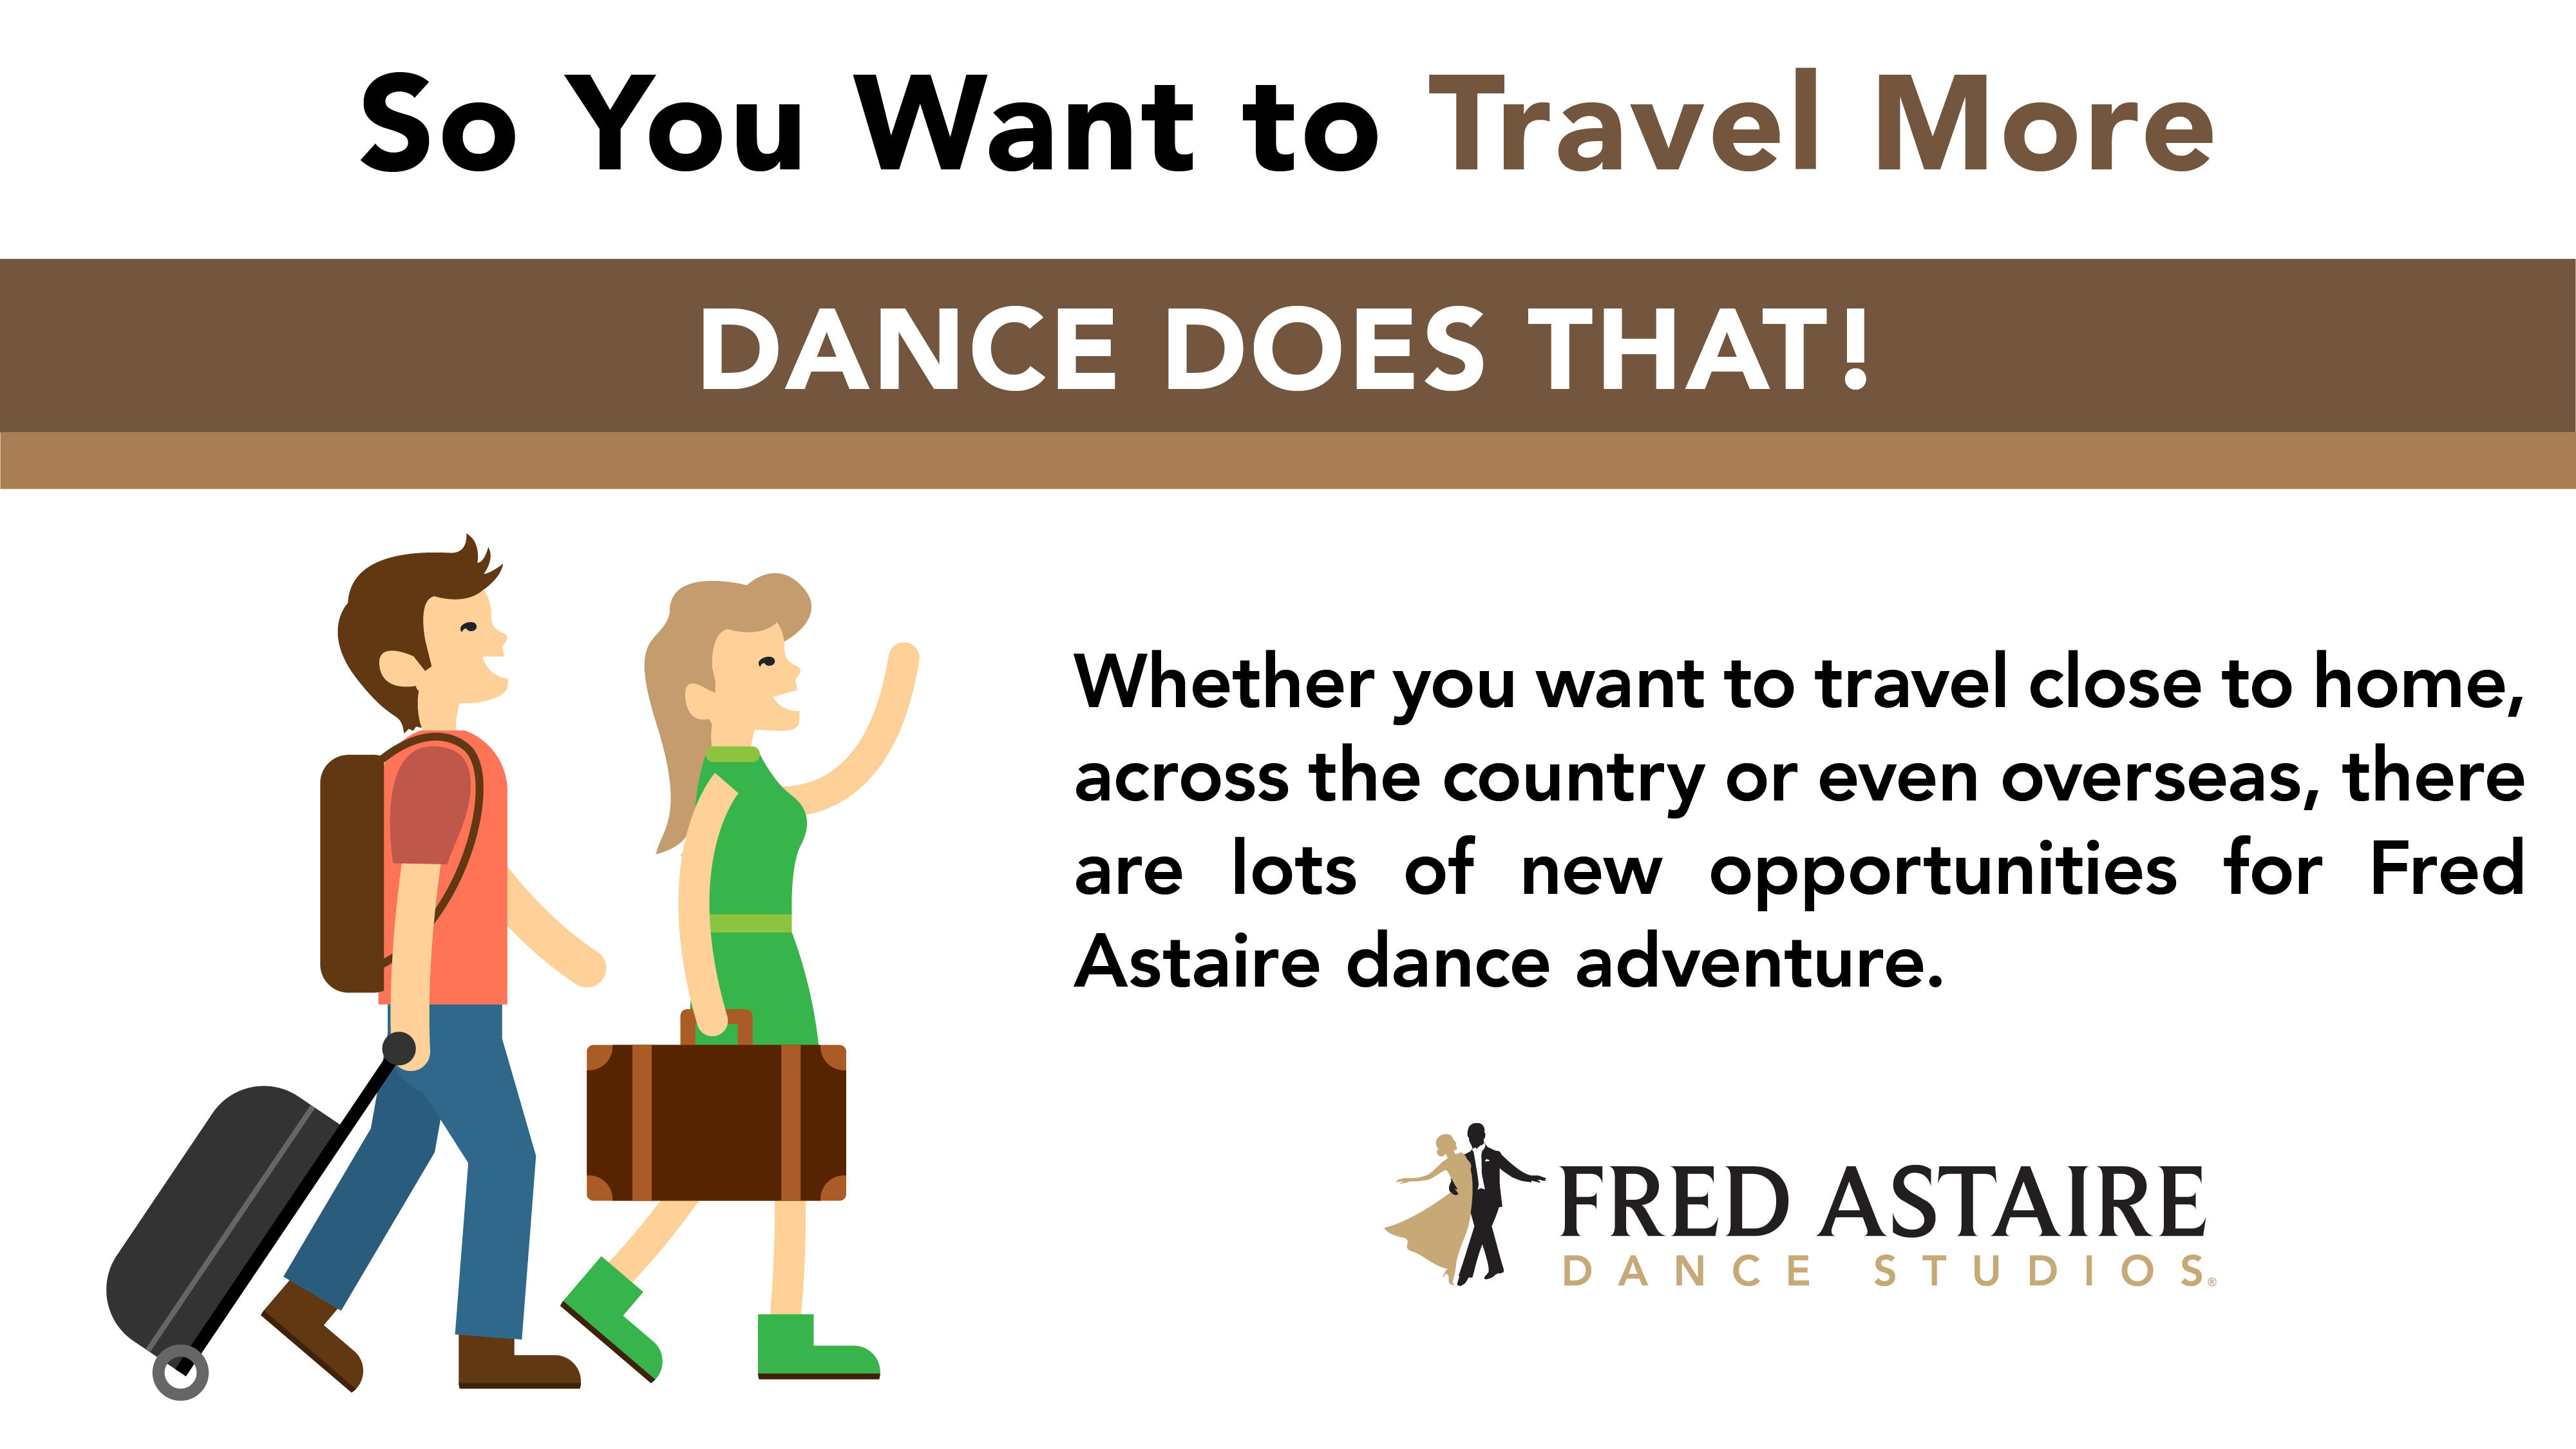 No matter if dancing by yourself, or with a Partner, the Fred Astaire Dance Studios - Riverside is the place for you to learn! We teach in Private Dance Lessons, Group Dance Lessons and of course we have Parties for you to practice at! Call today to learn more! 401-415-9766